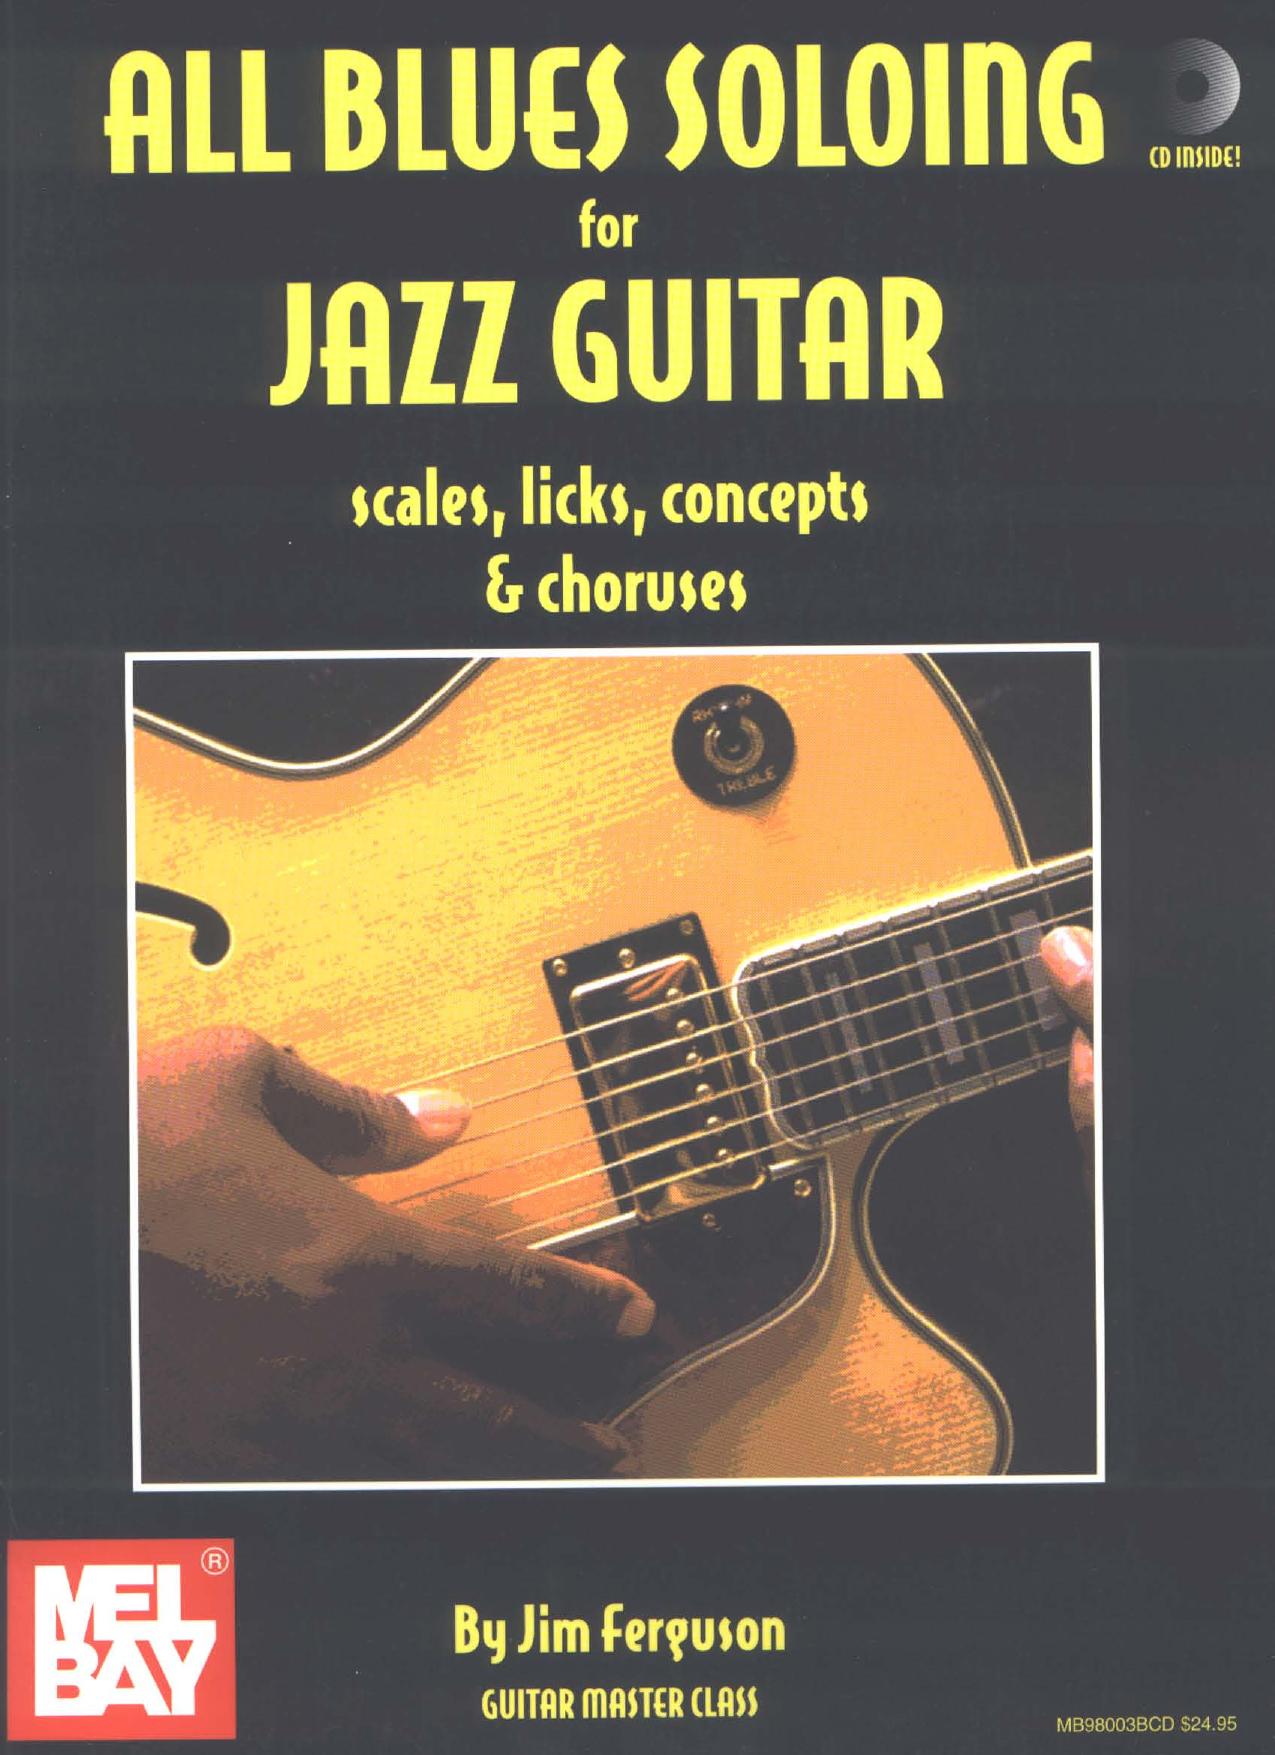 All Blues for Jazz Guitar: Comping Styles, Chords & Grooves